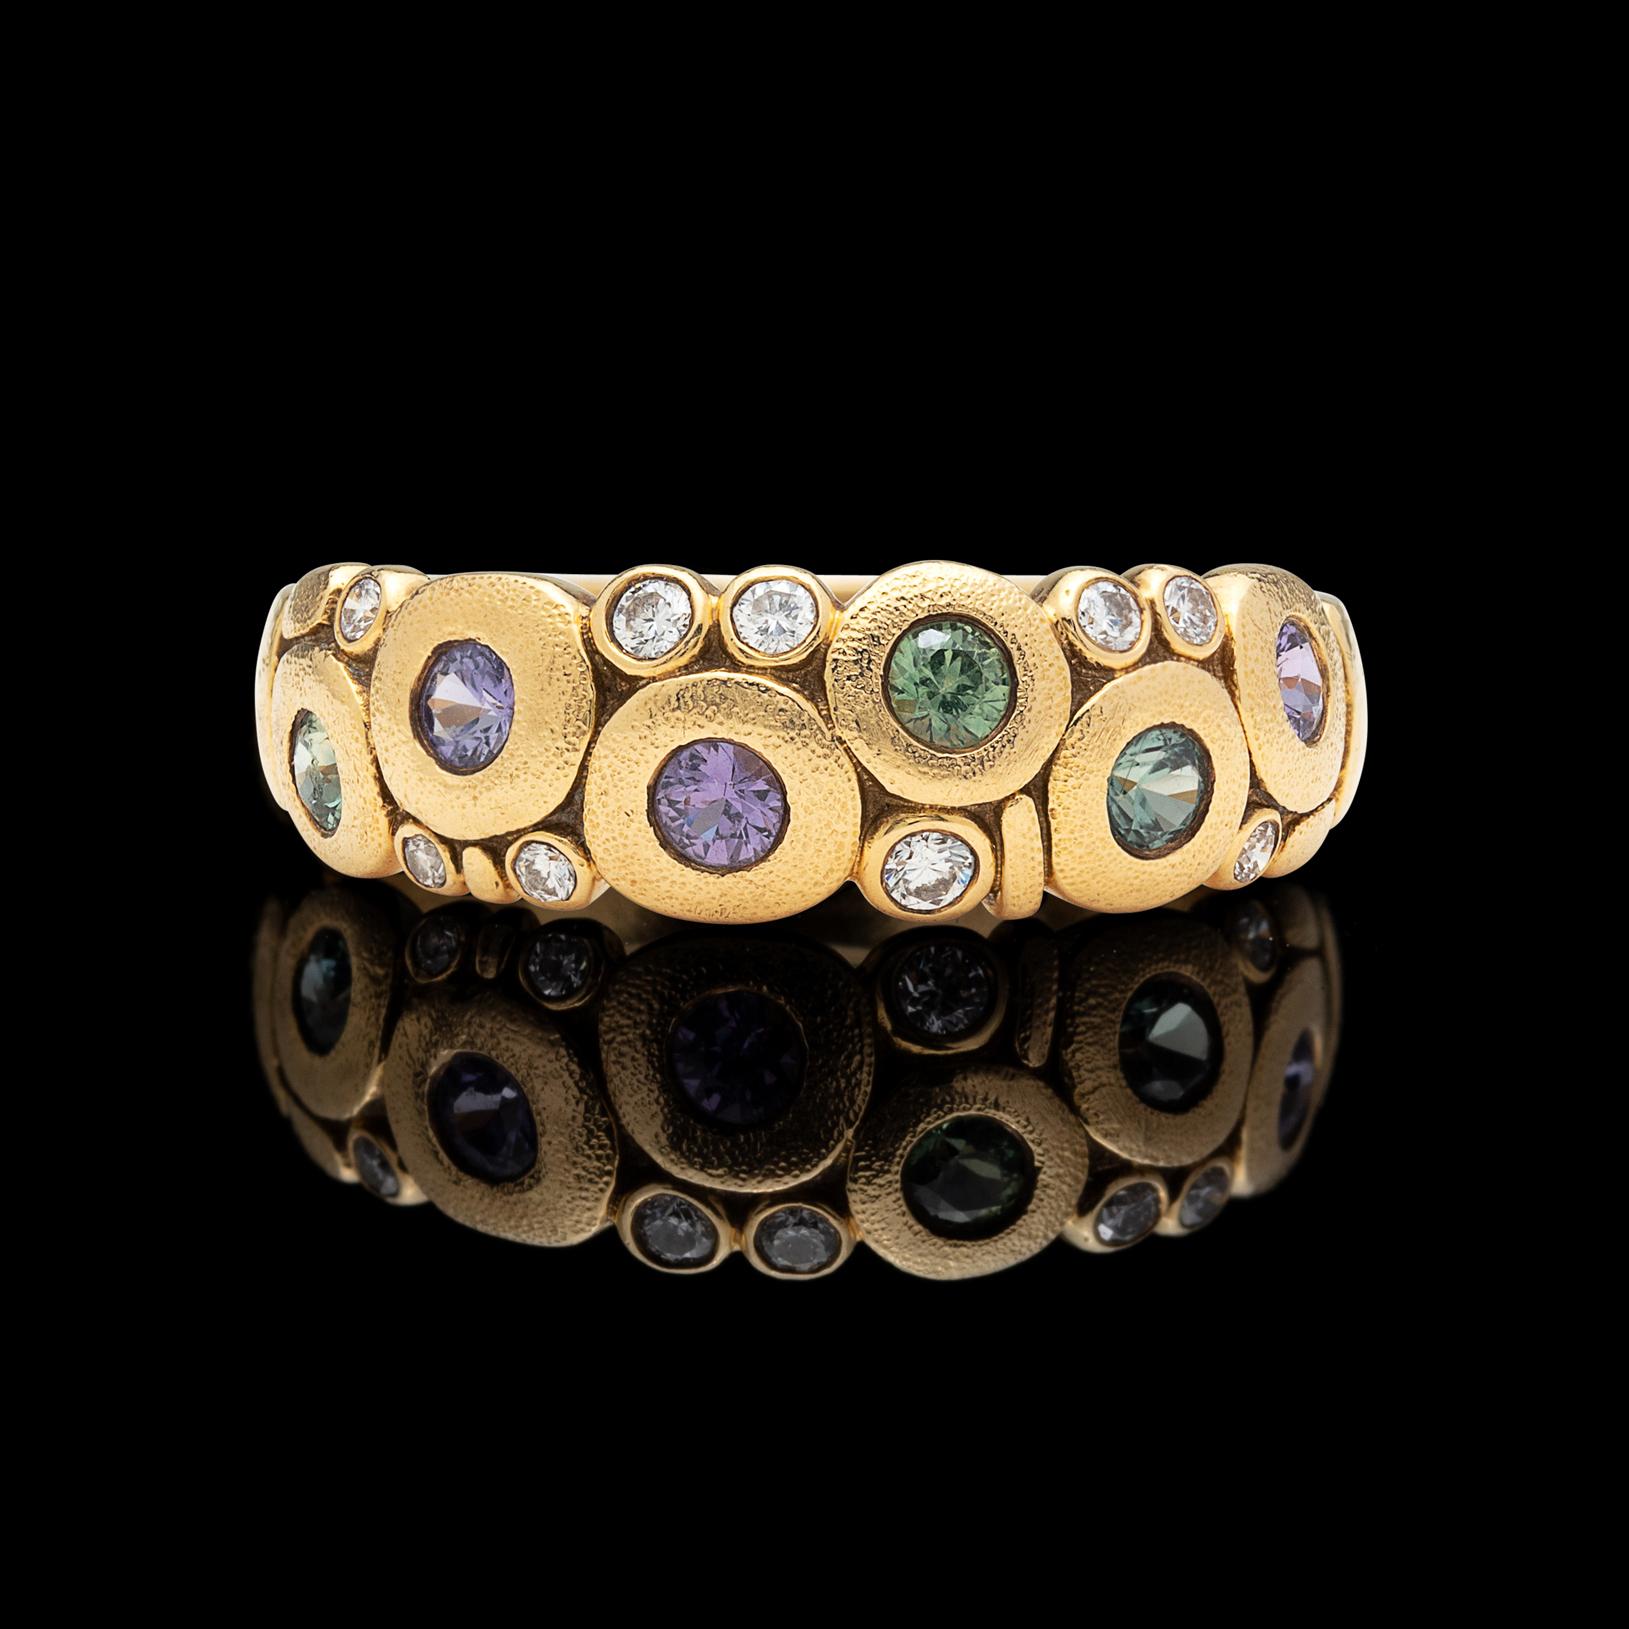 Fun and flirty, the 18k gold ring is one of the most popular styles from famed designer Alex Sepkus. Set with the Pastel Rainbow Mix of 6 round multi-color sapphires and 9 round brilliant-cut diamonds, with a total gem weight of 0.62 carat. The ring